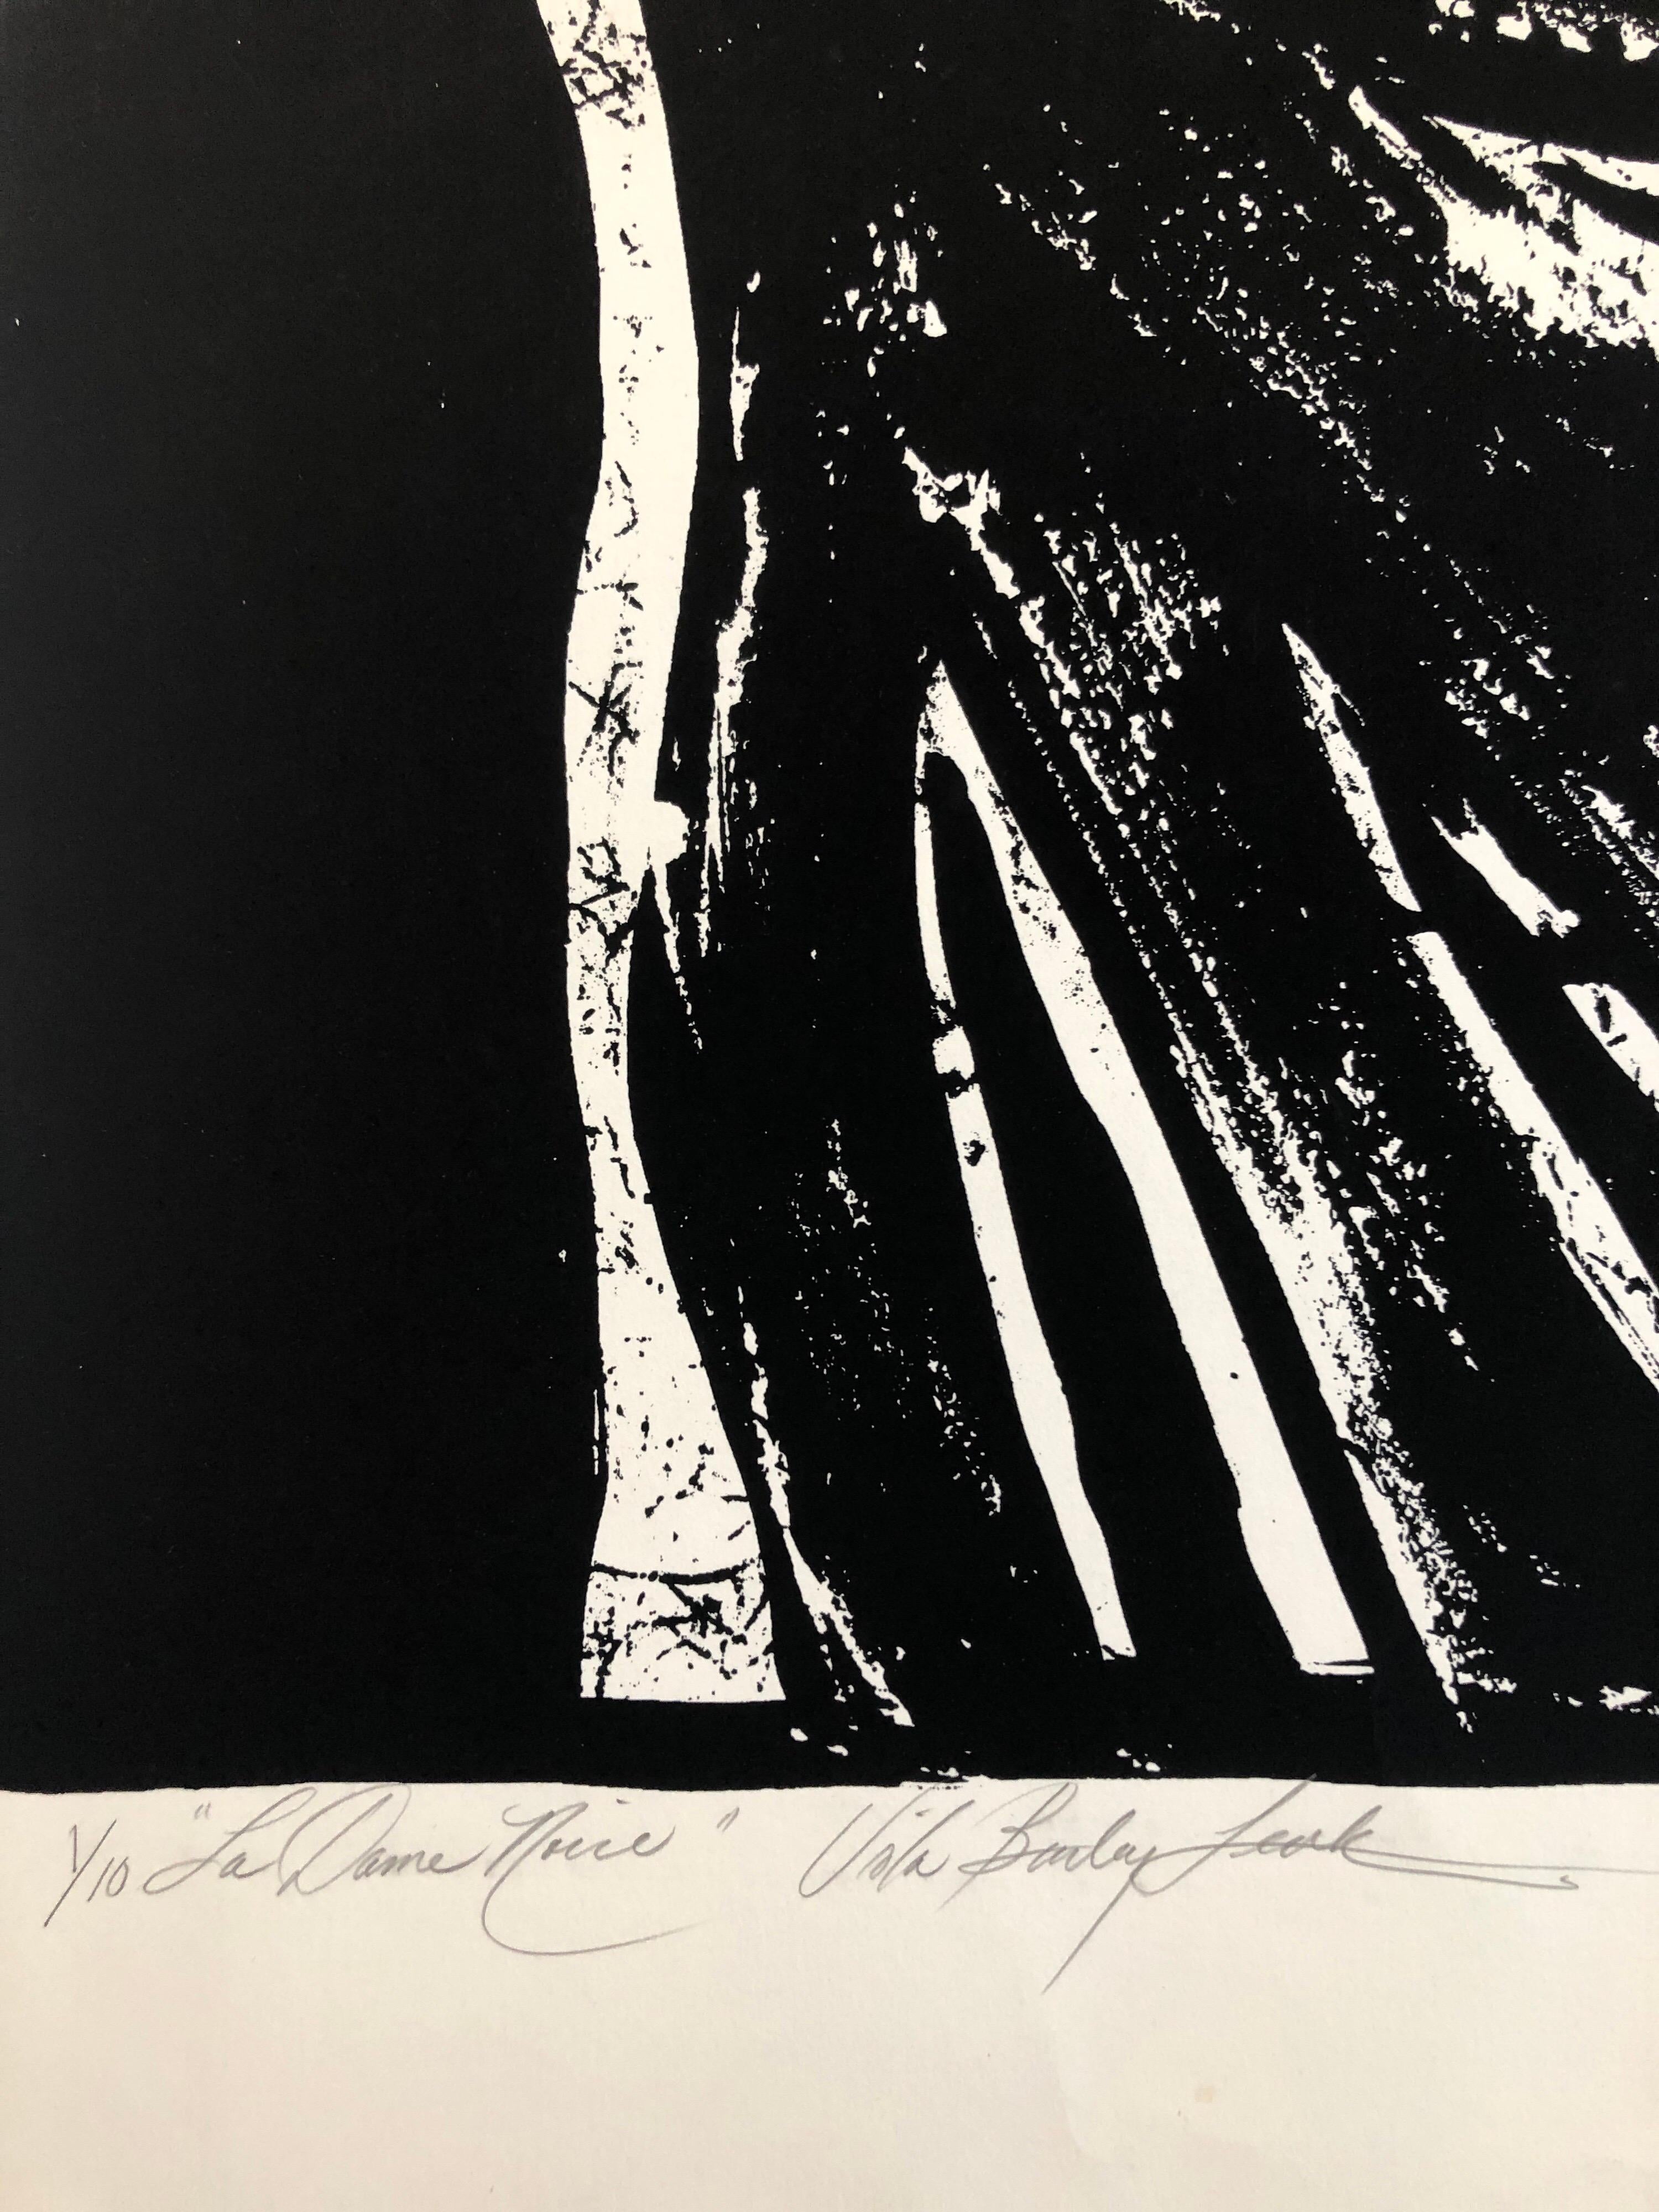 La Dame Noire
From the small edition of 10. from 1982. I am not sure if this is a woodcut or woodblock print or a silkscreen screenprint or some combination. 

Viola Burley Leak, American (1944 - )
Viola Leak was born in Nashville, Tennessee, she